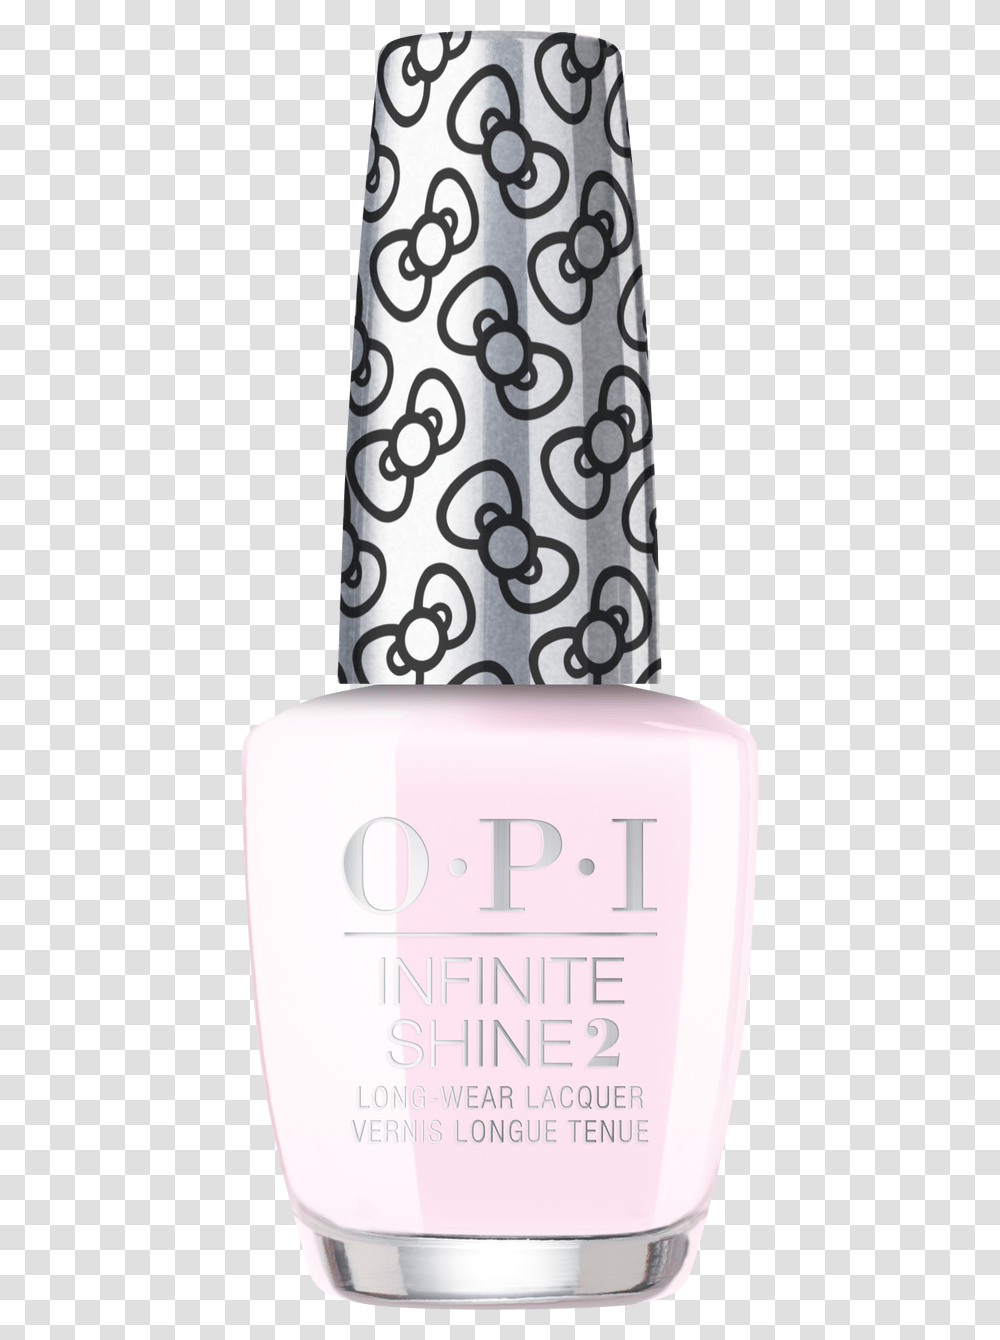 Opi Infinite Shine Opi Infinite Shine Hello Kitty Collection Pile, Cosmetics, Soap, Jar, Bottle Transparent Png